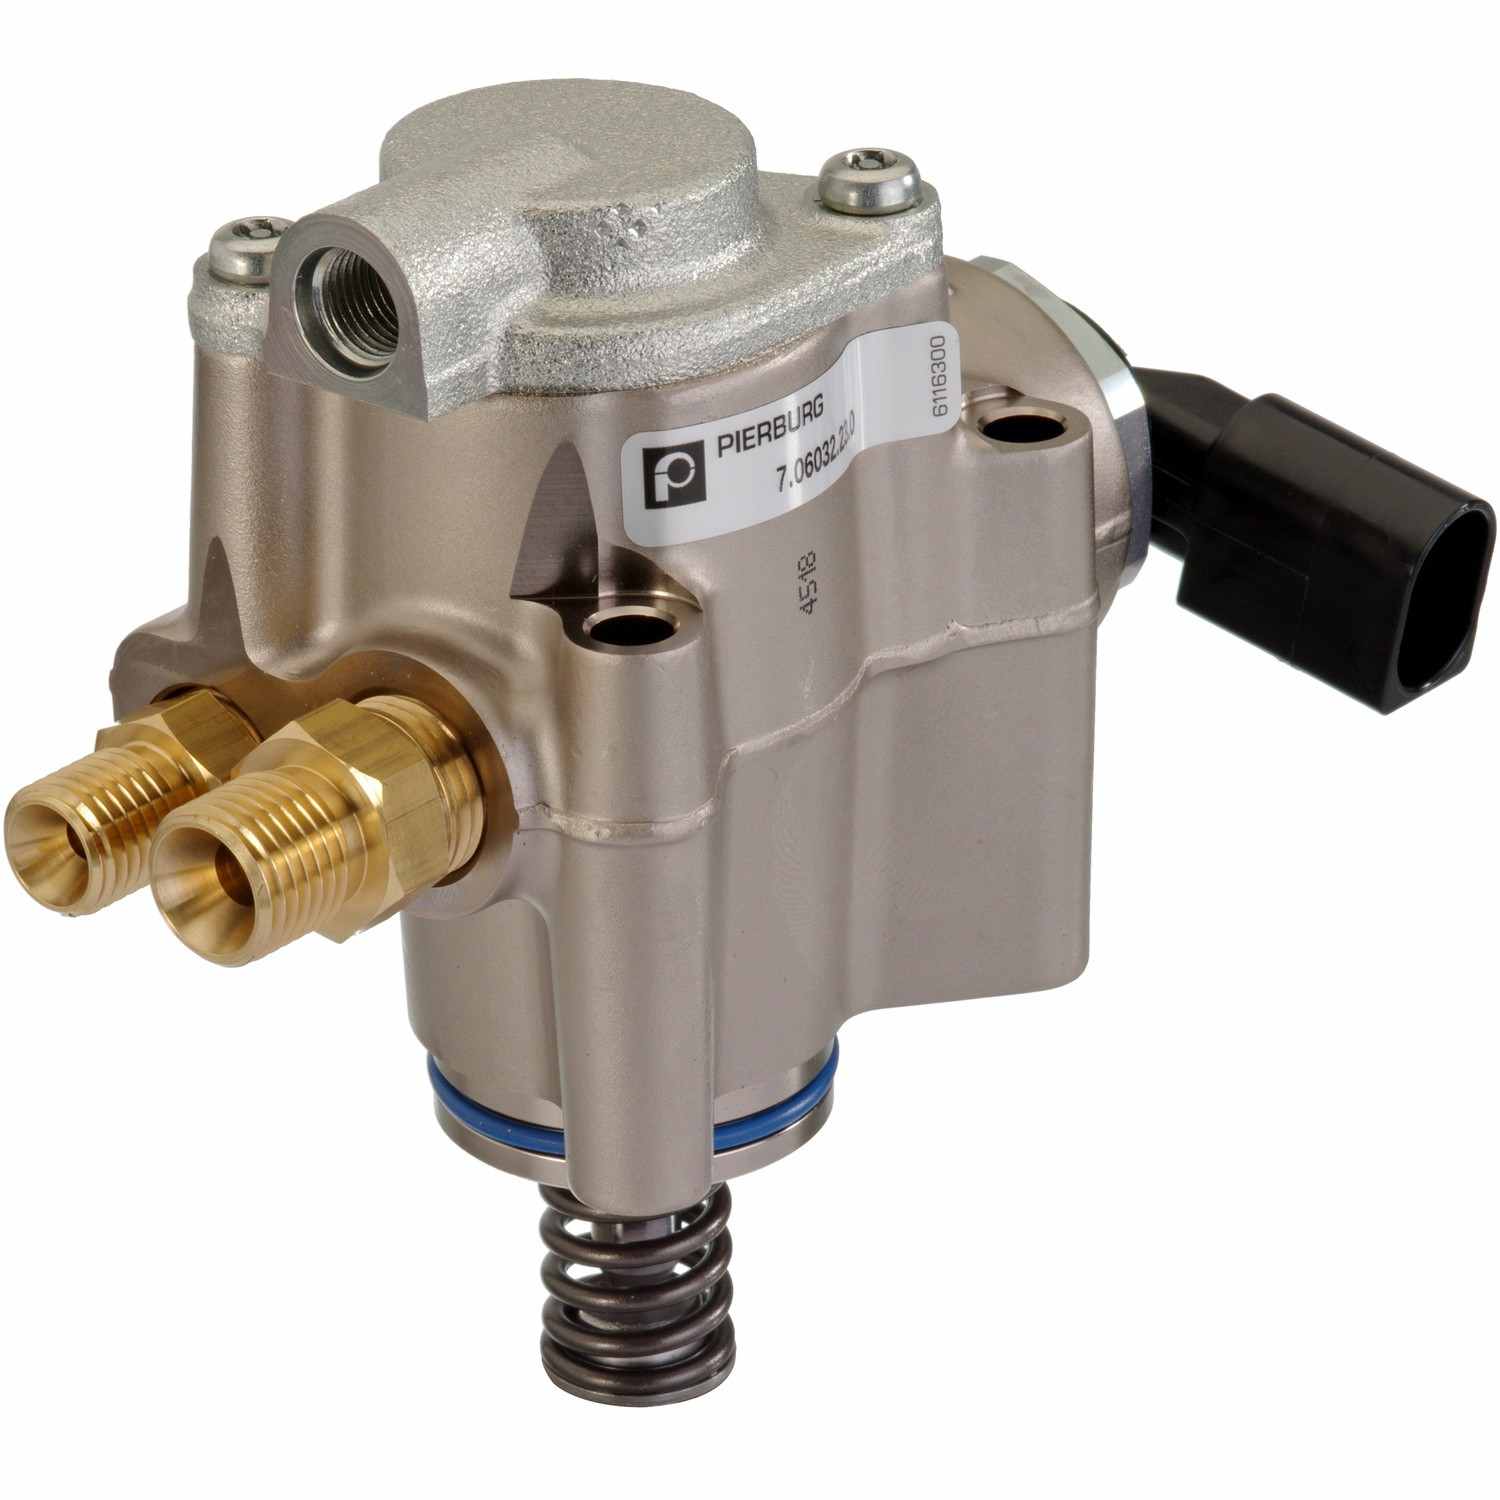 Pierburg distributed by Hella Direct Injection High Pressure Fuel Pump 7.06032.23.0